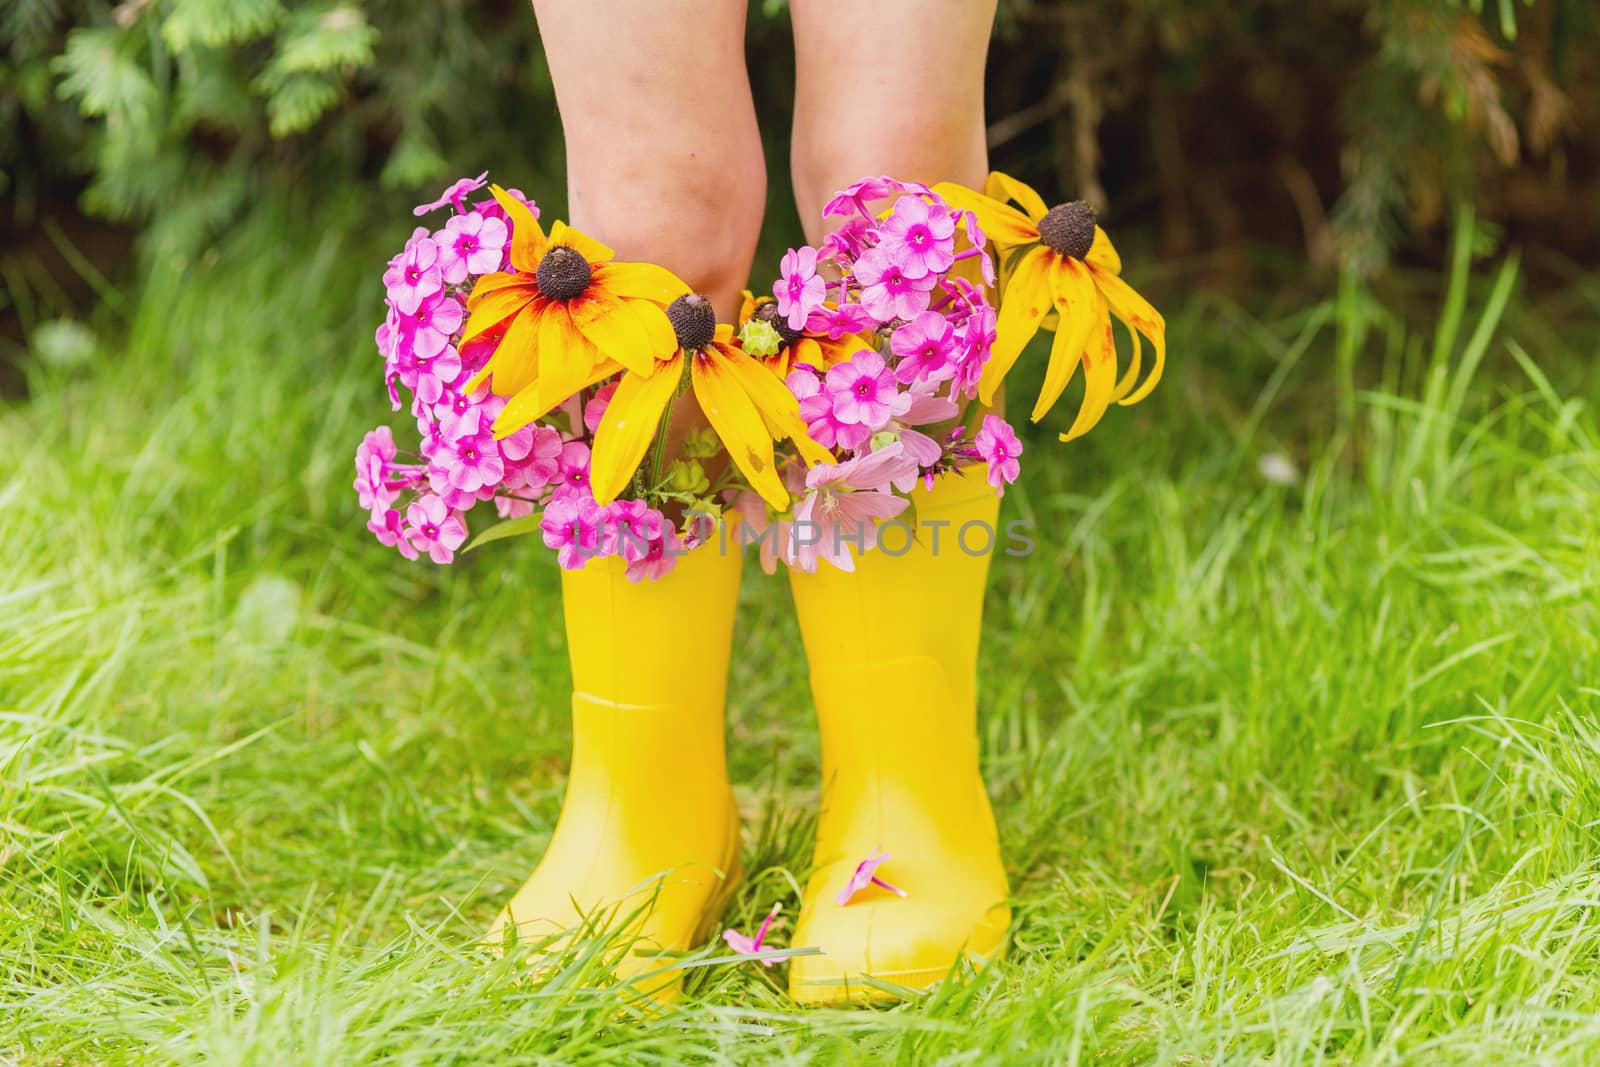 Child's feet in rubber yellow boots with autumn flowers in it